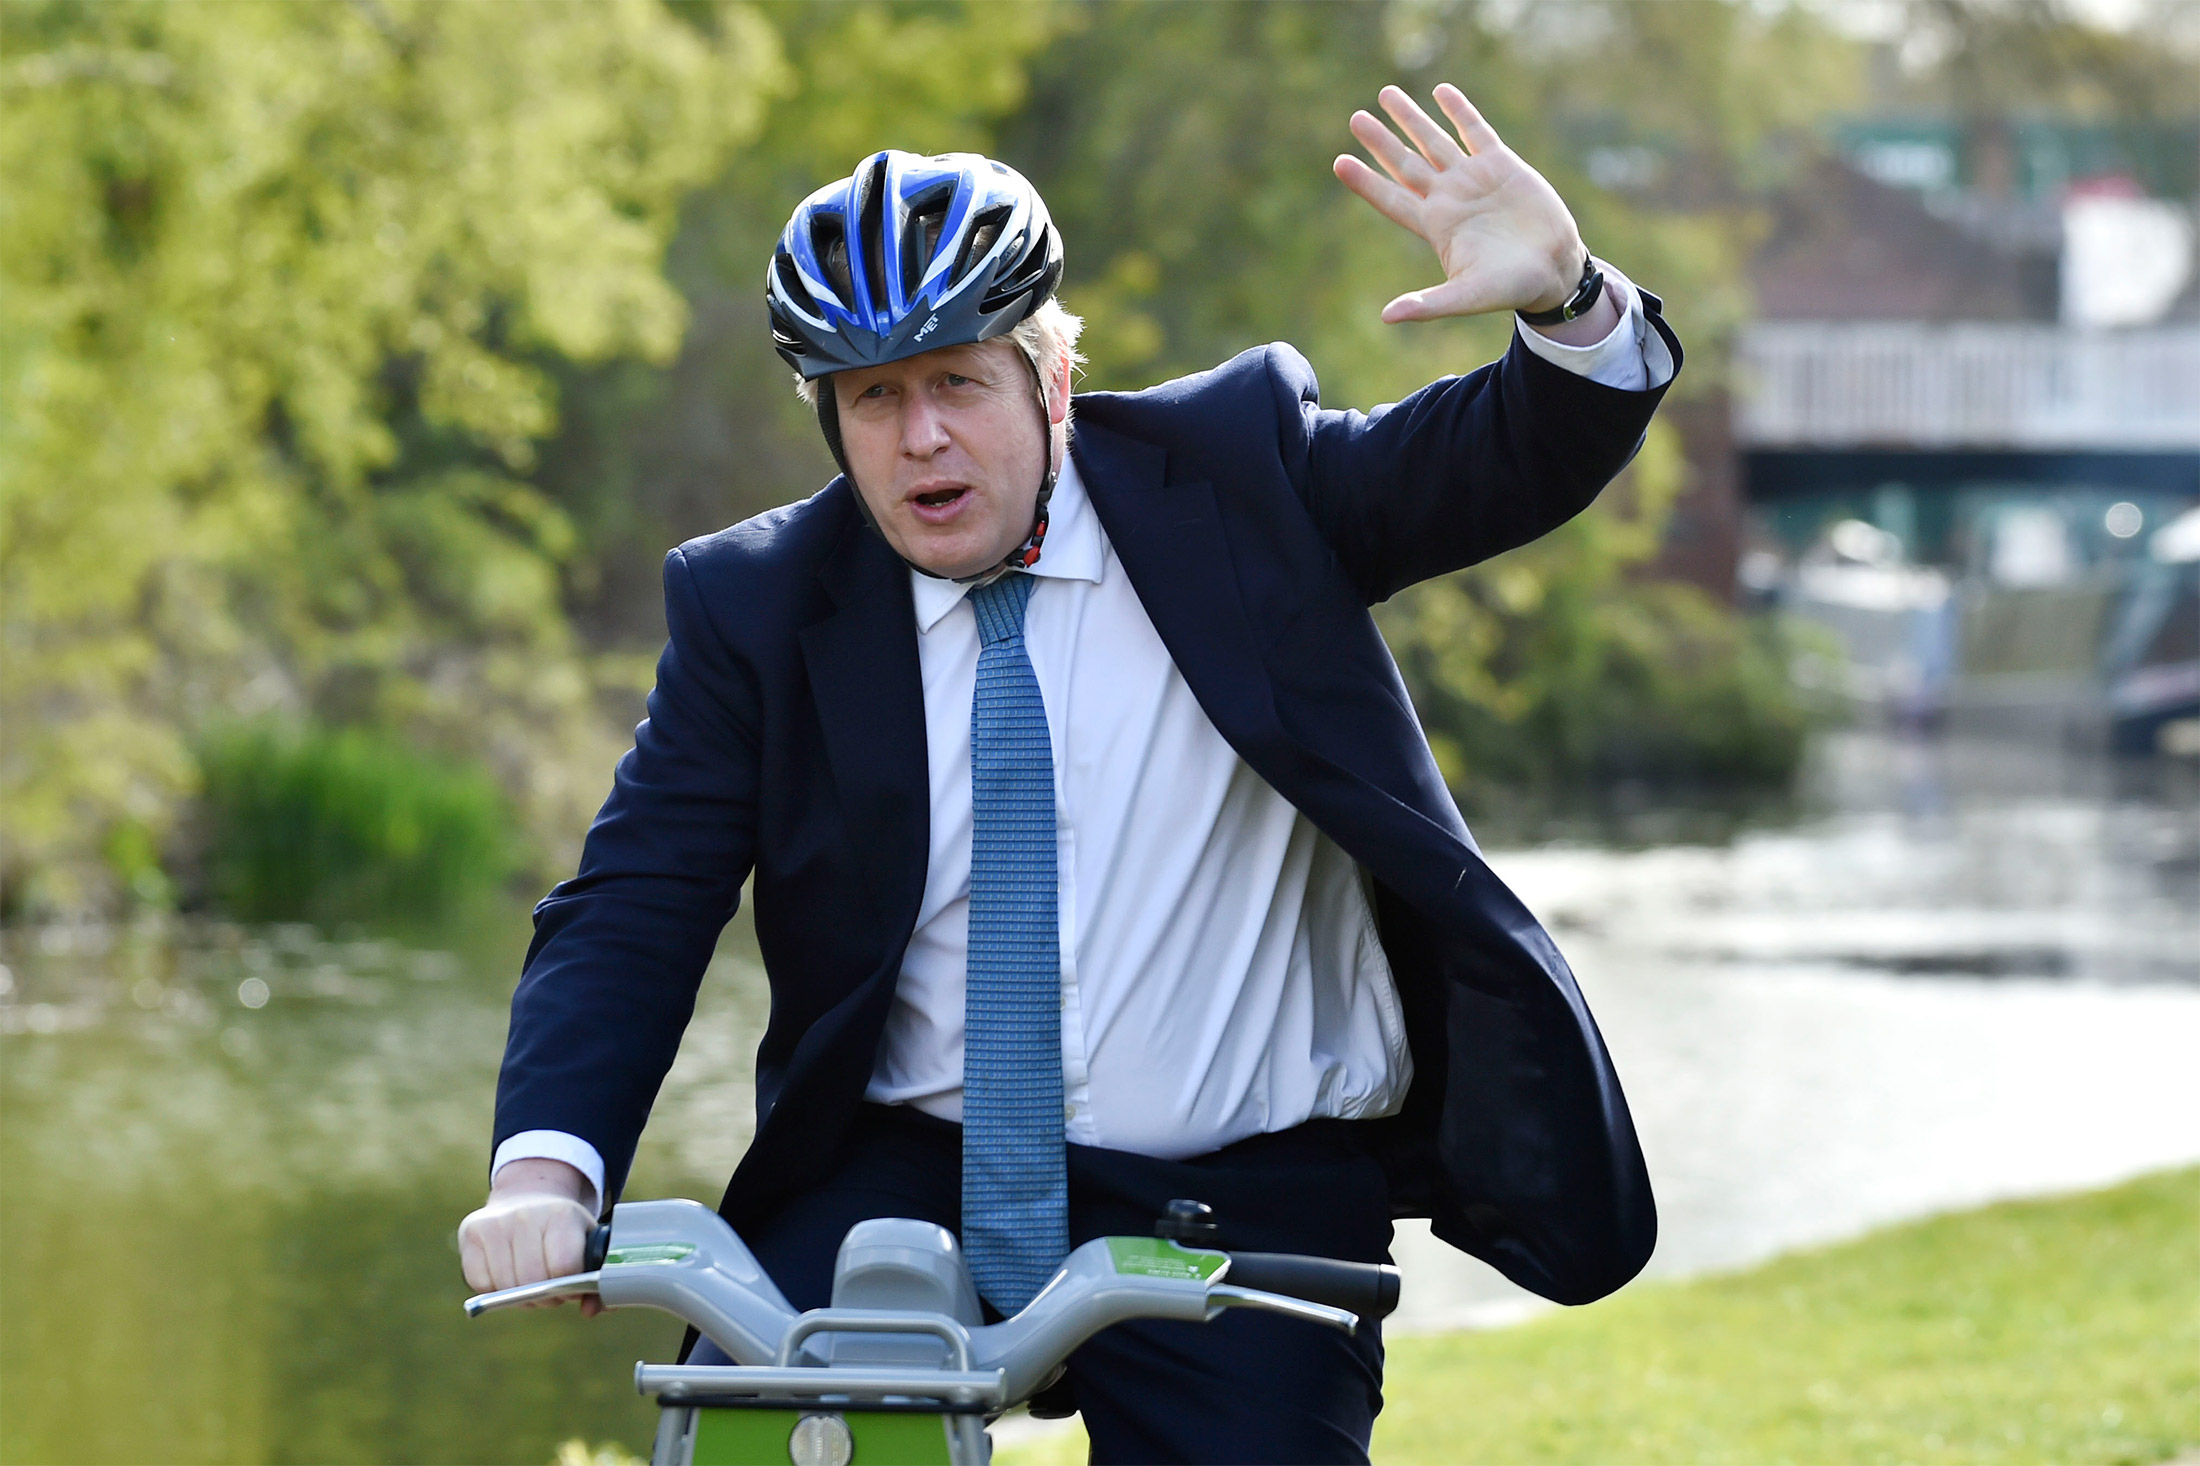 Then-Prime Minister Boris Johnson&nbsp;rides a bike during a Conservative party local election visit in Stourbridge, England, on May 5, 2021.